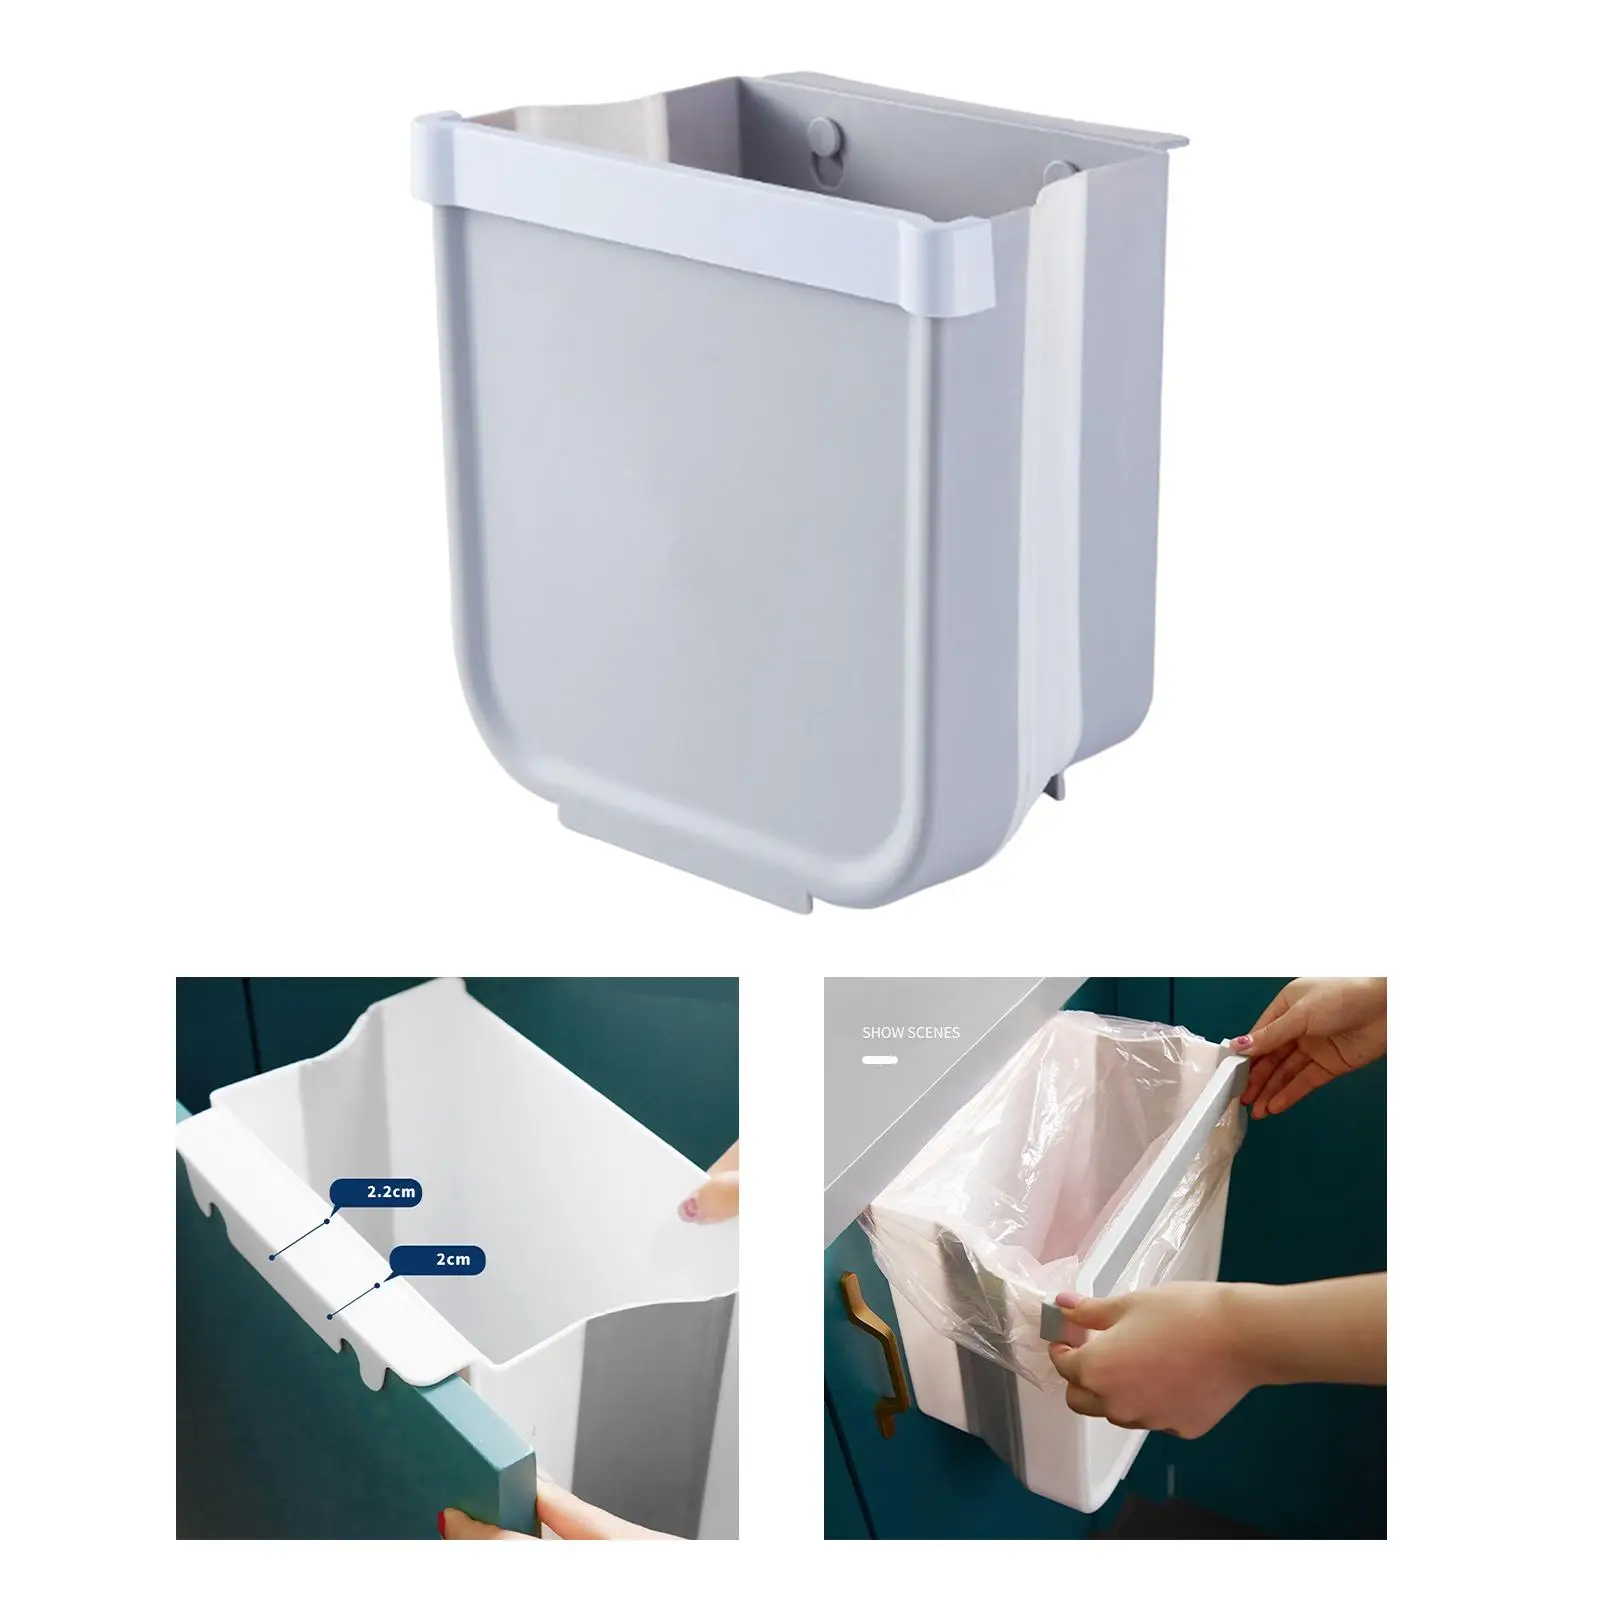 Collapsible Wall Mounted Trash Can Hanging Small Waste Basket Garbage Bin Dustbin for Cabinet Camping Bedroom Door Office